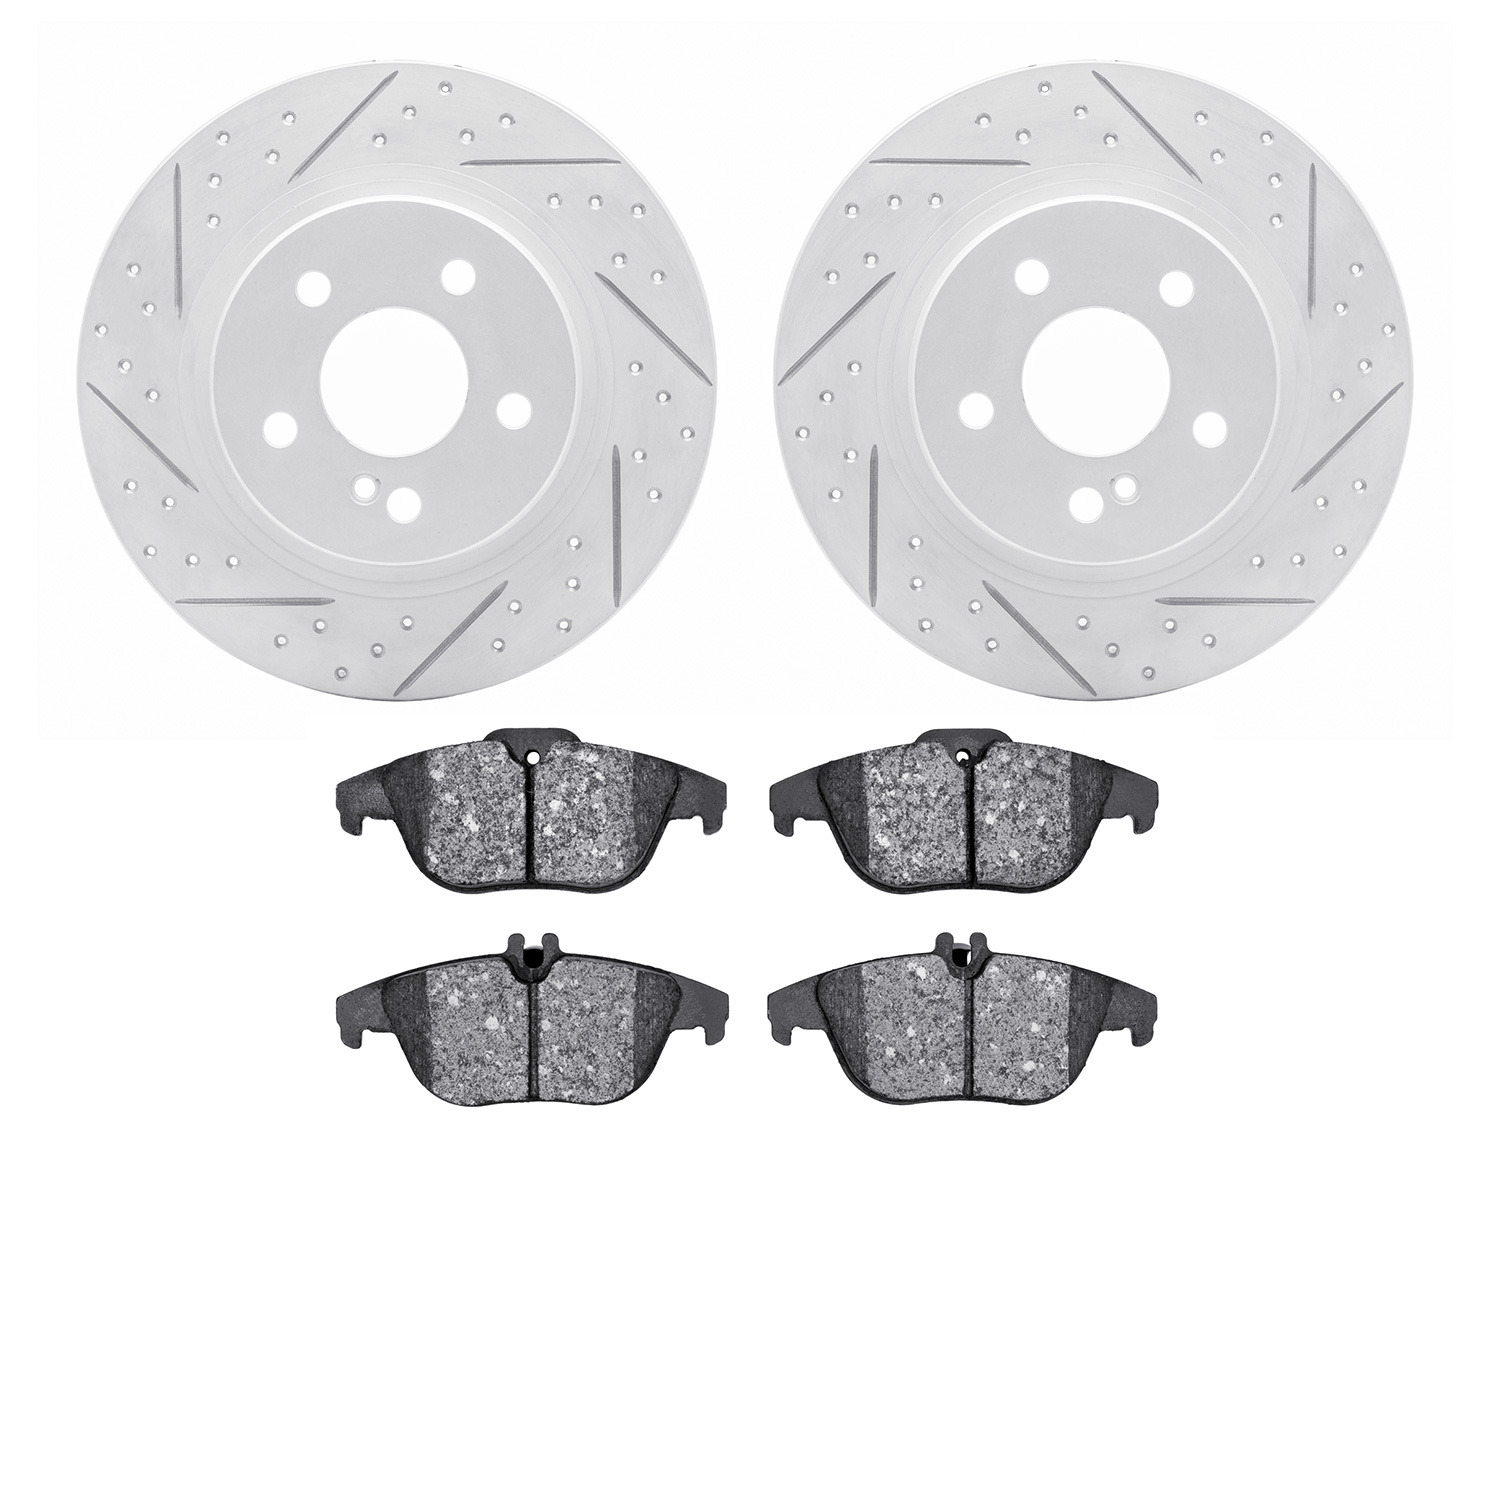 2502-63034 Geoperformance Drilled/Slotted Rotors w/5000 Advanced Brake Pads Kit, 2010-2015 Mercedes-Benz, Position: Rear